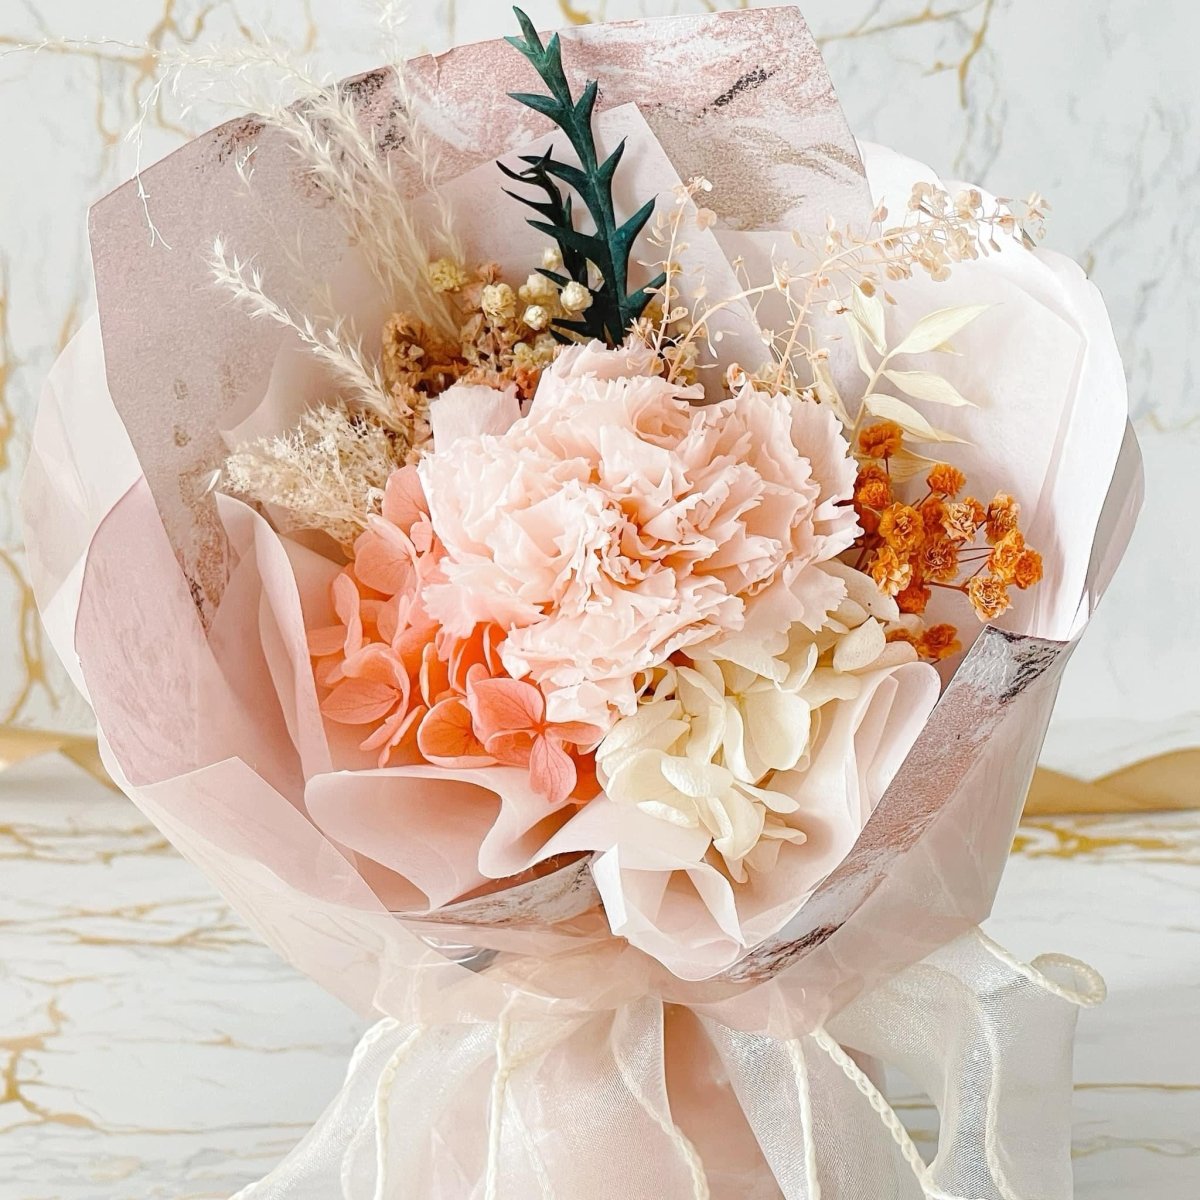 Carnation - Everlasting Flower Bouquet (Real Preserved Roses and Dried Flowers) - Rainbowly Fresh Fruit Gift and Flower Arrangments